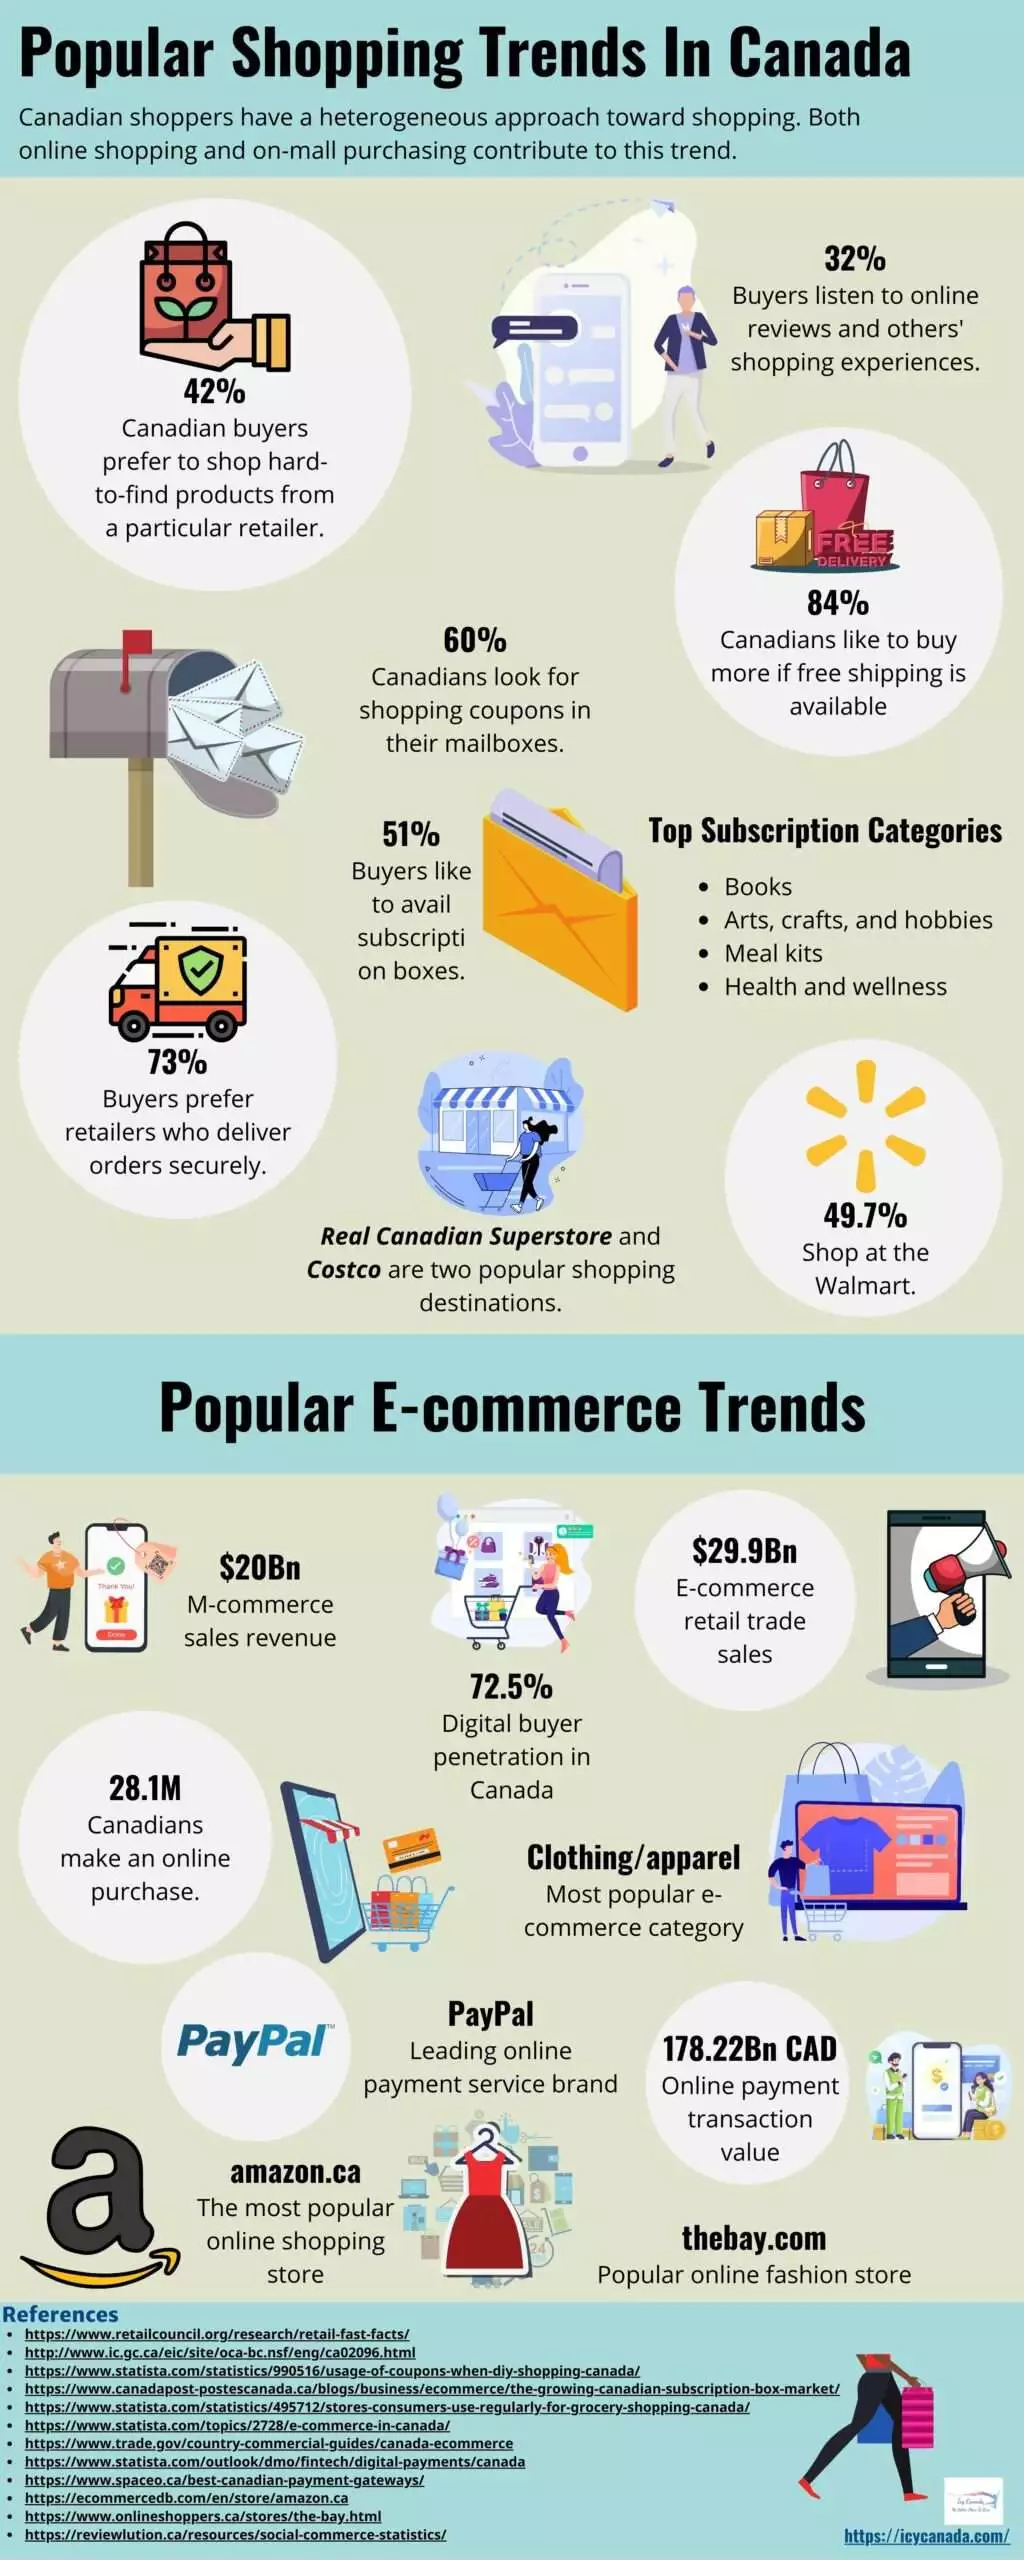 Popular Shopping Trends In Canada